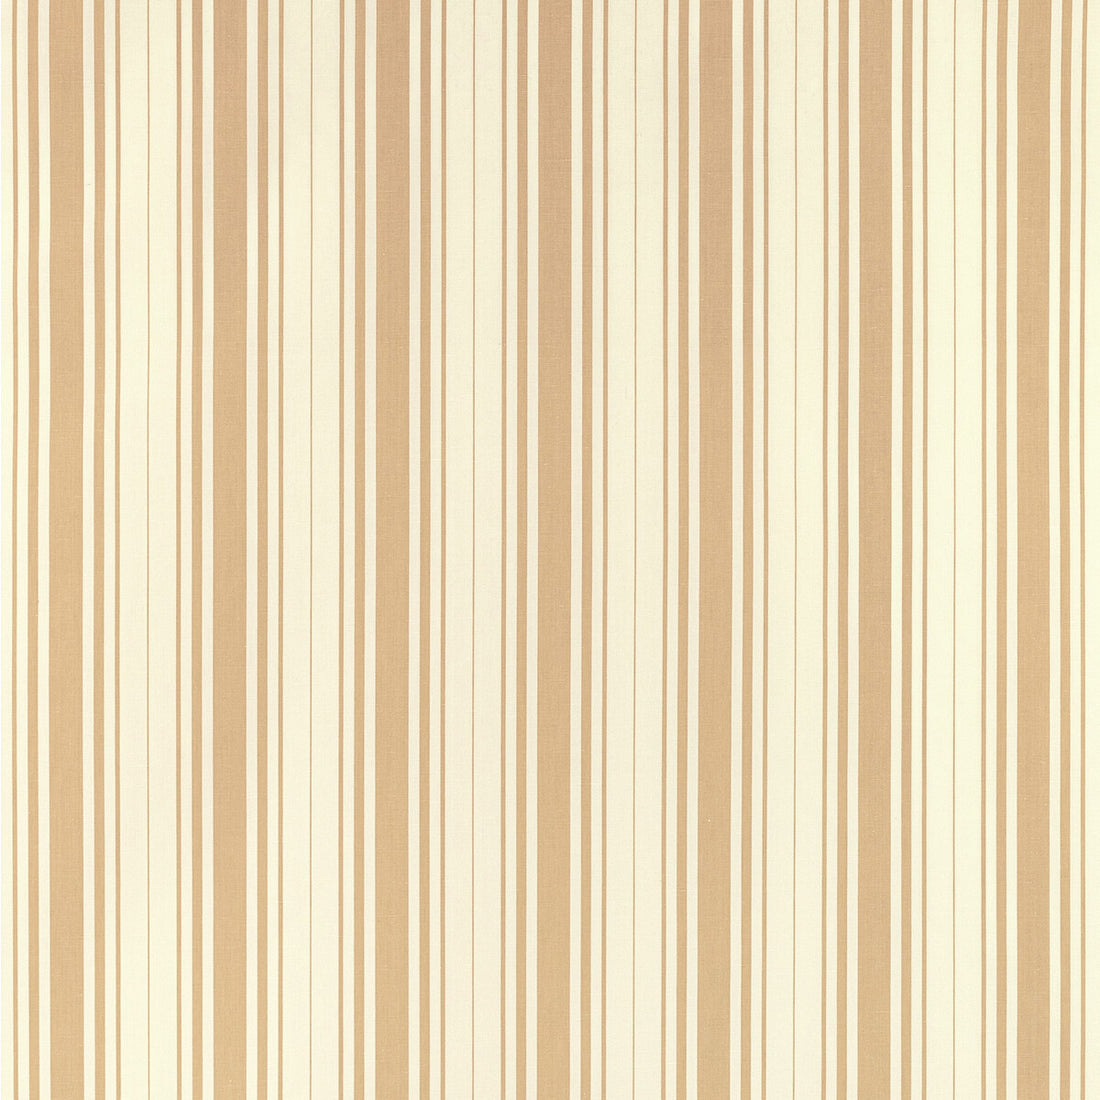 Baldwin Stripe fabric in wheat color - pattern 2022100.116.0 - by Lee Jofa in the Sarah Bartholomew collection